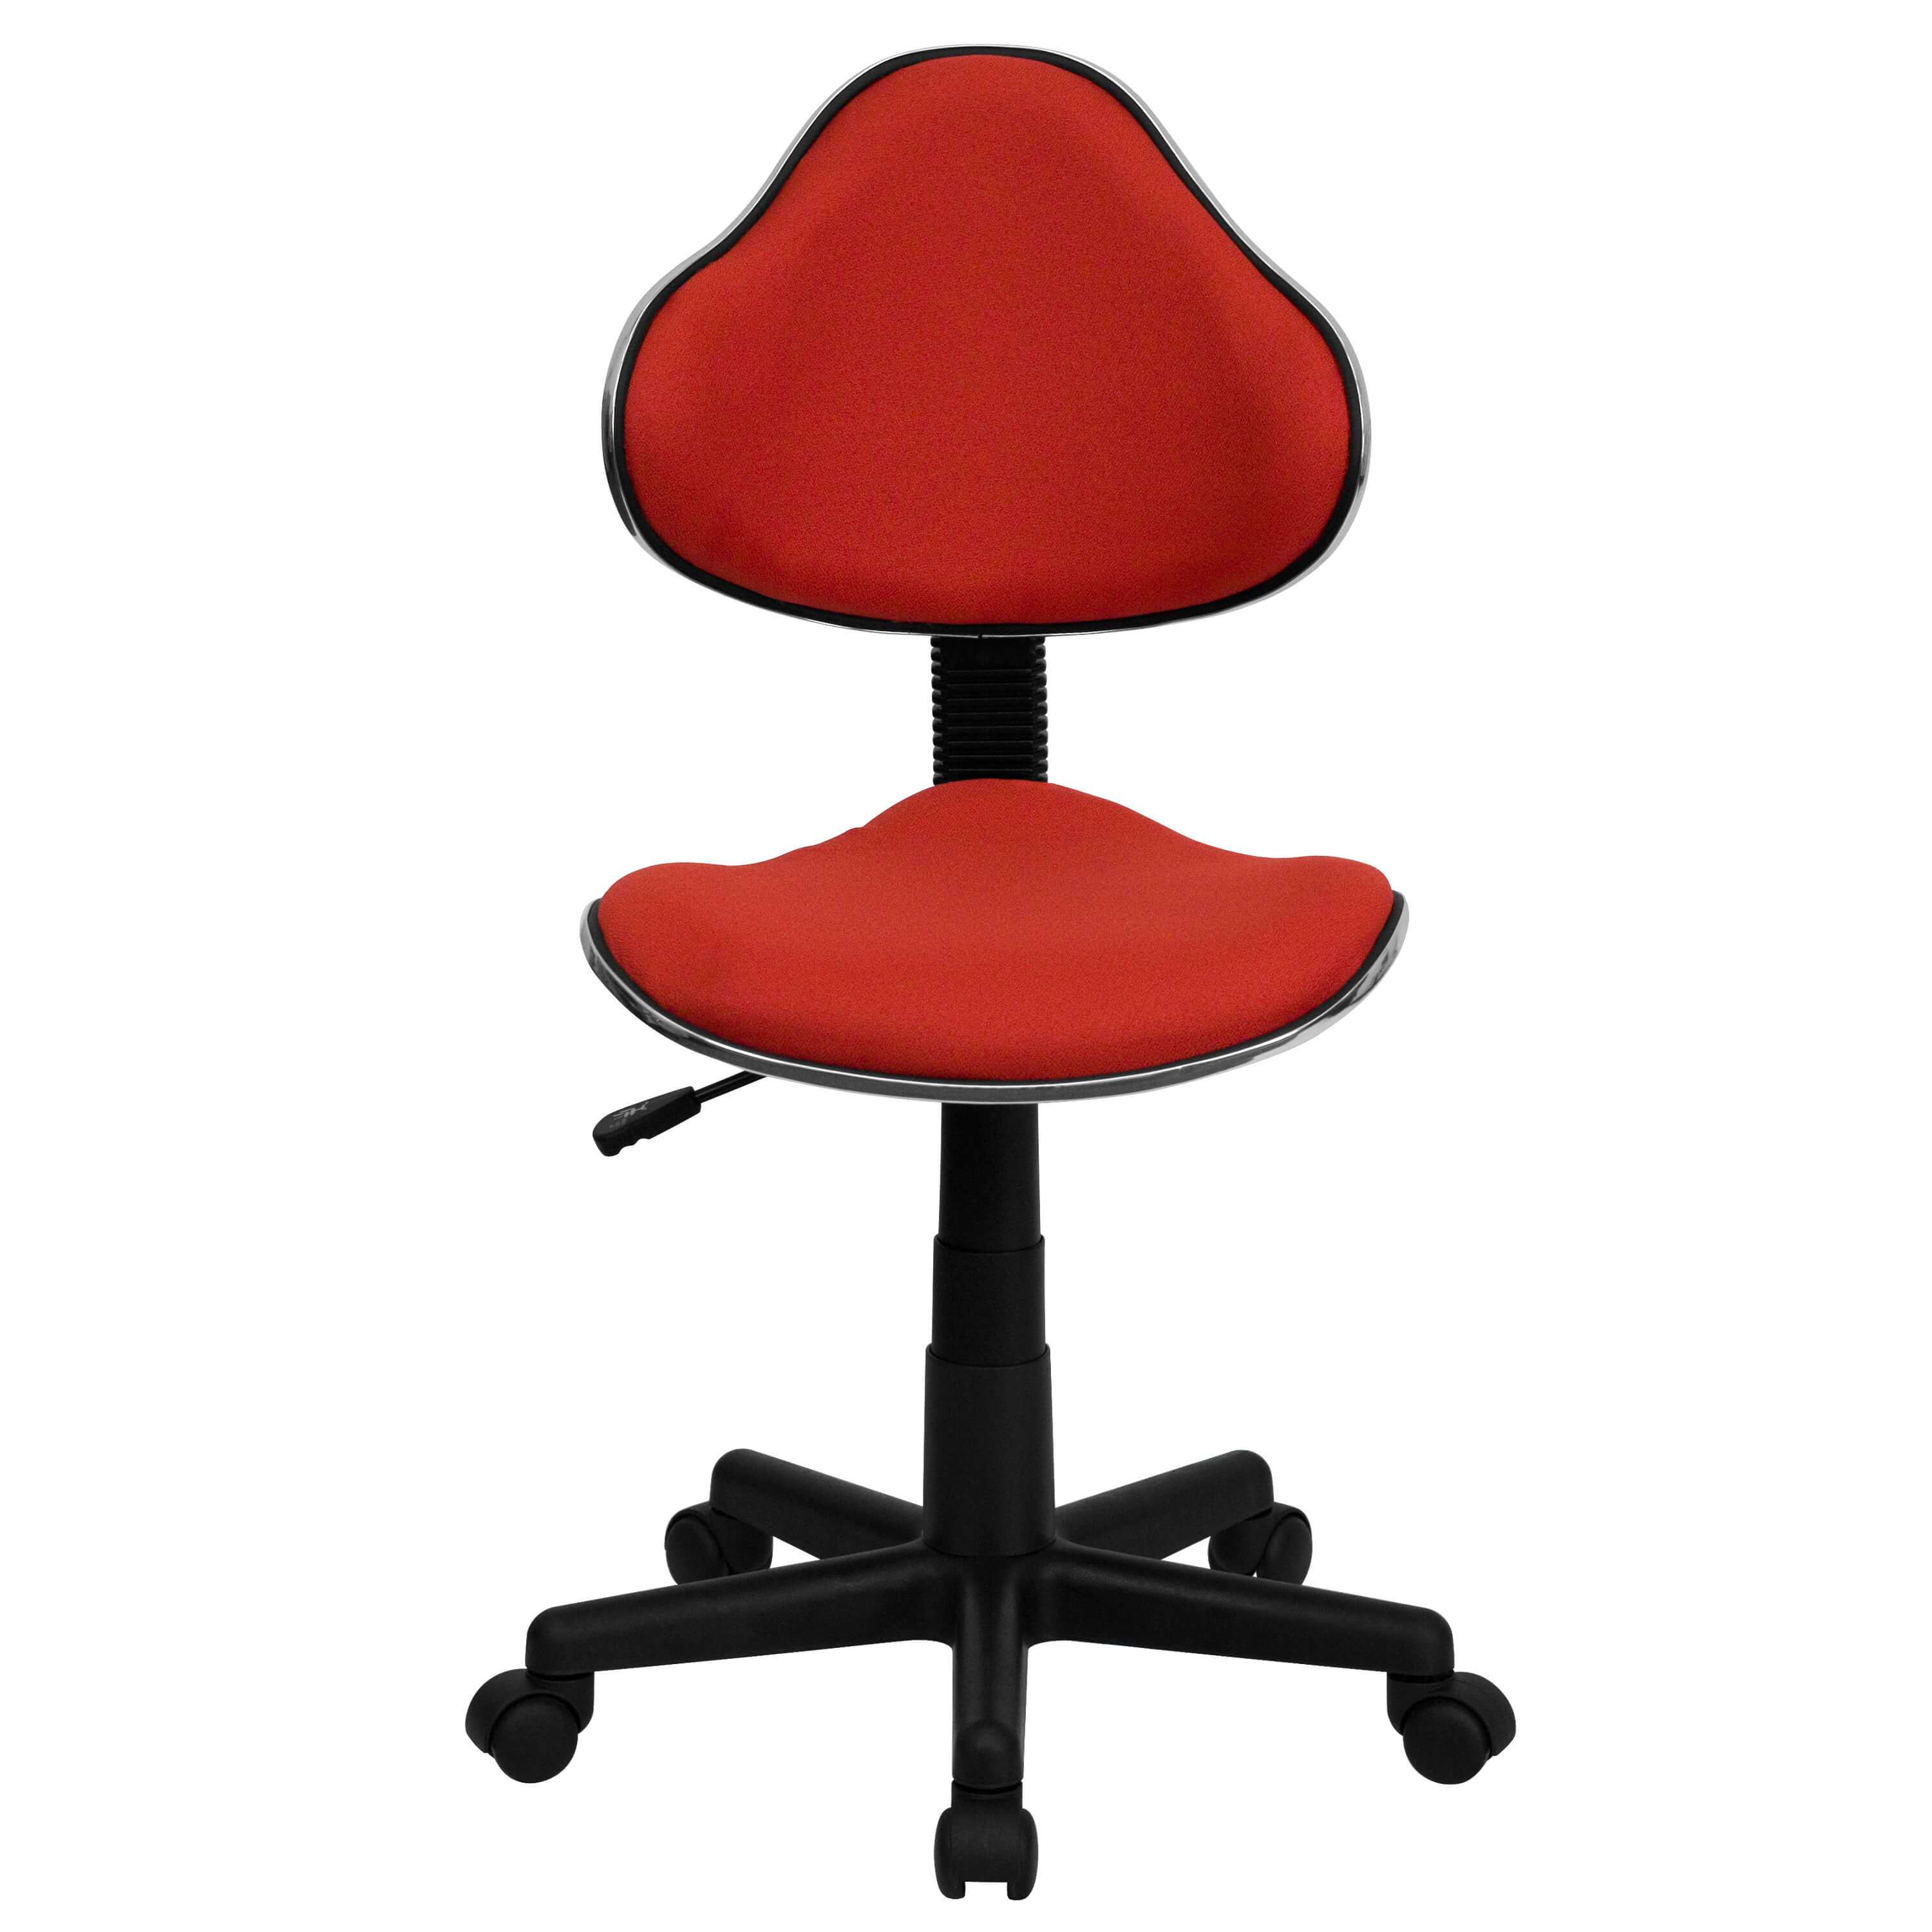 Colorful desk chairs CUB BT 699 RED GG FLA